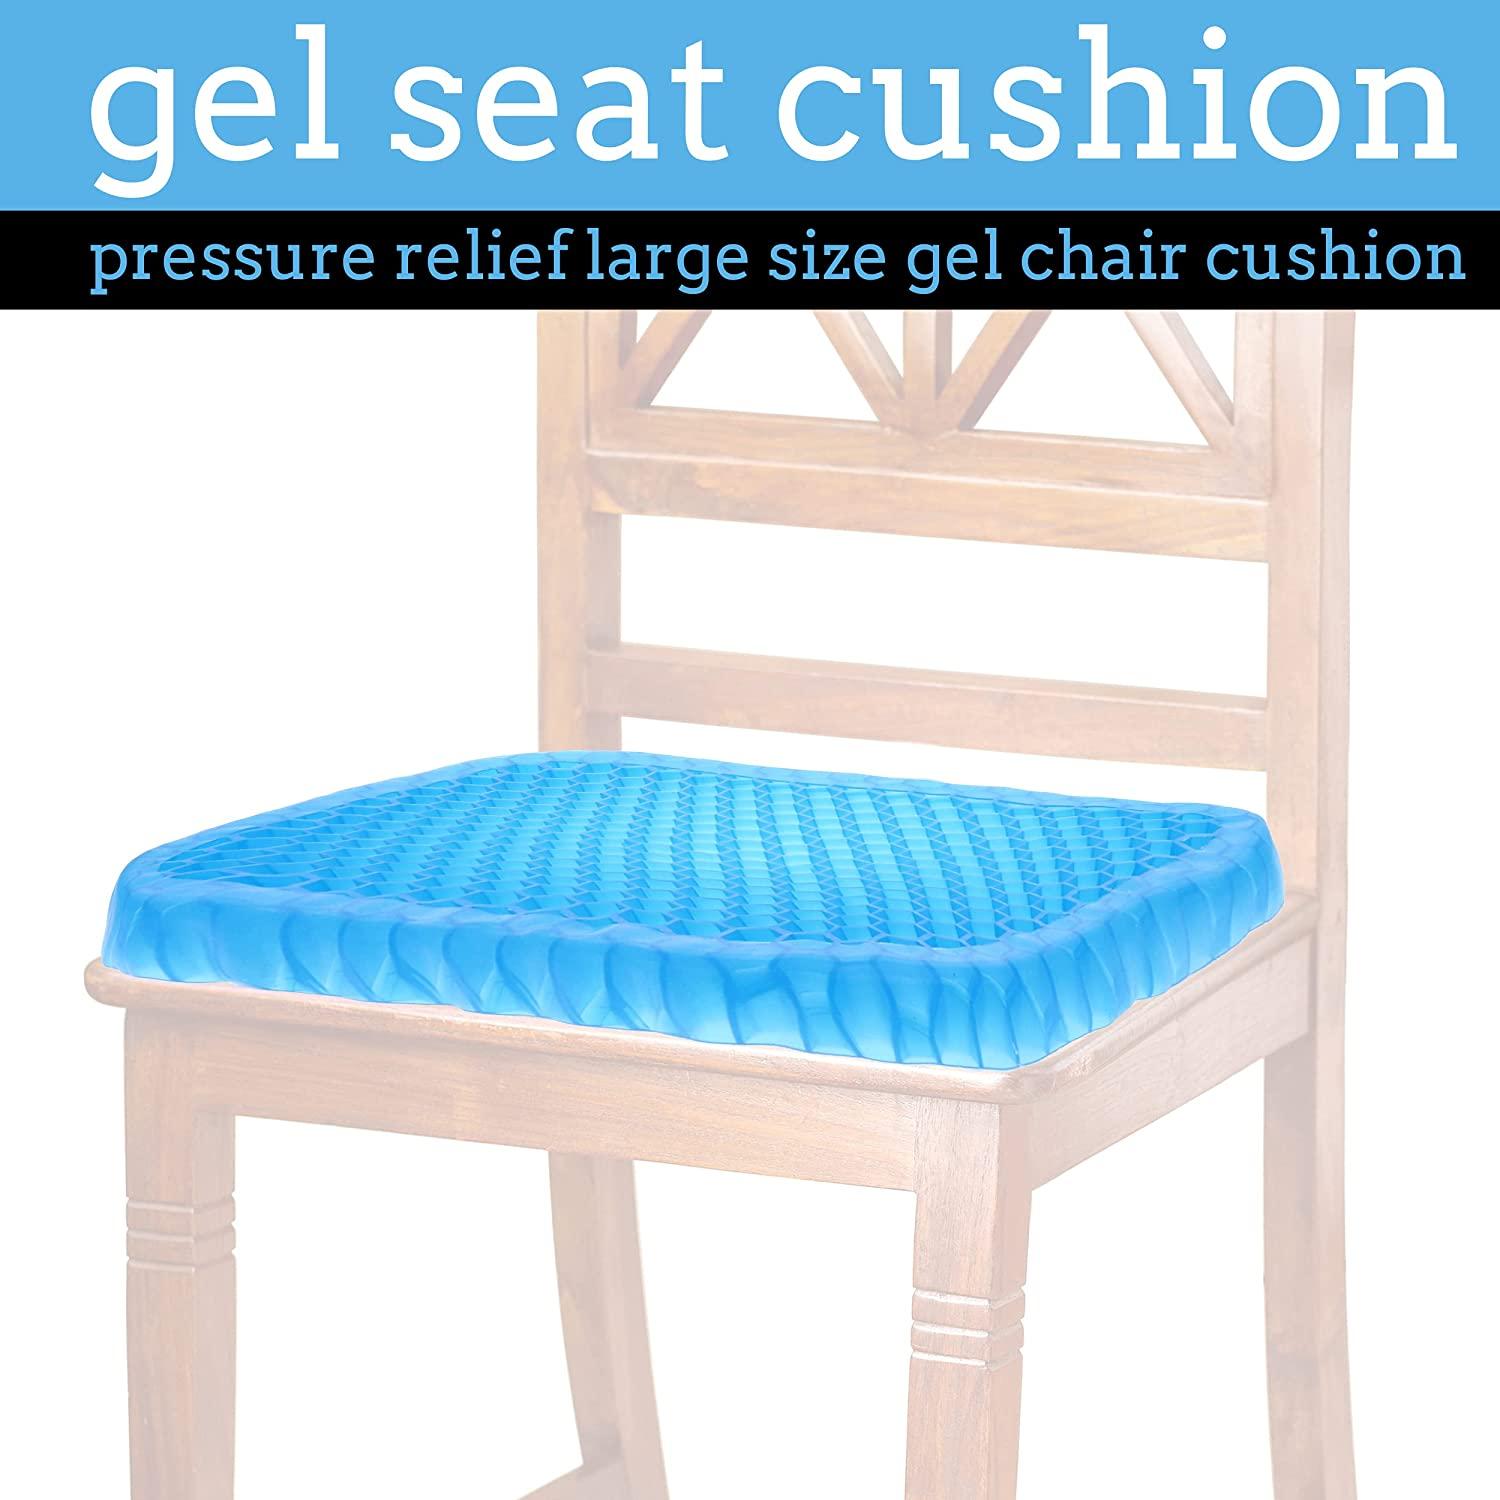 Gel Seat Cushion for Long Sitting - Portable Gel Cushion with Ergonomic  Honeycomb Design - Small Size 14.5 x 12 x 1.5 Gel Seat Cushions for  Pressure Relief Sores Effective for Sedentary